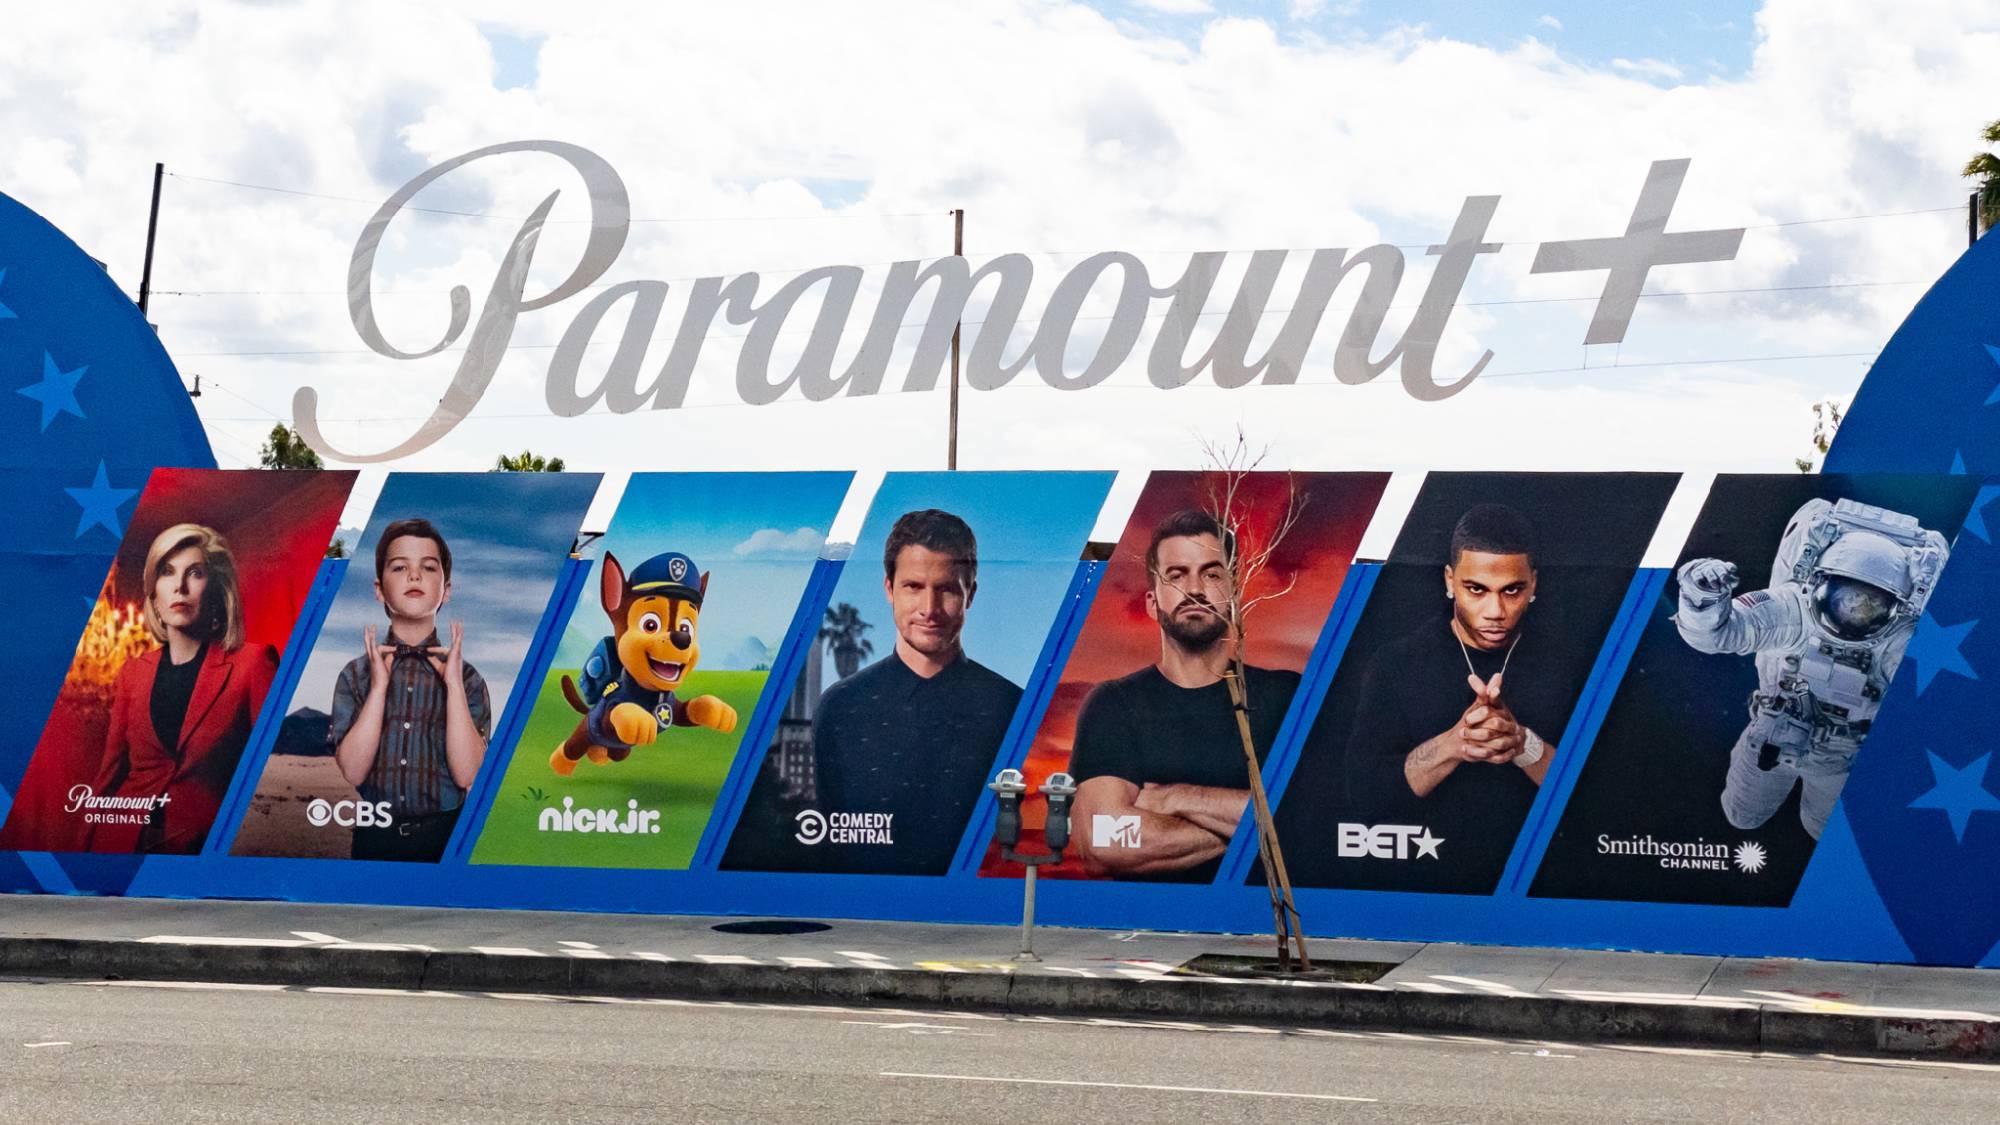 About NFL on CBS on Paramount Plus